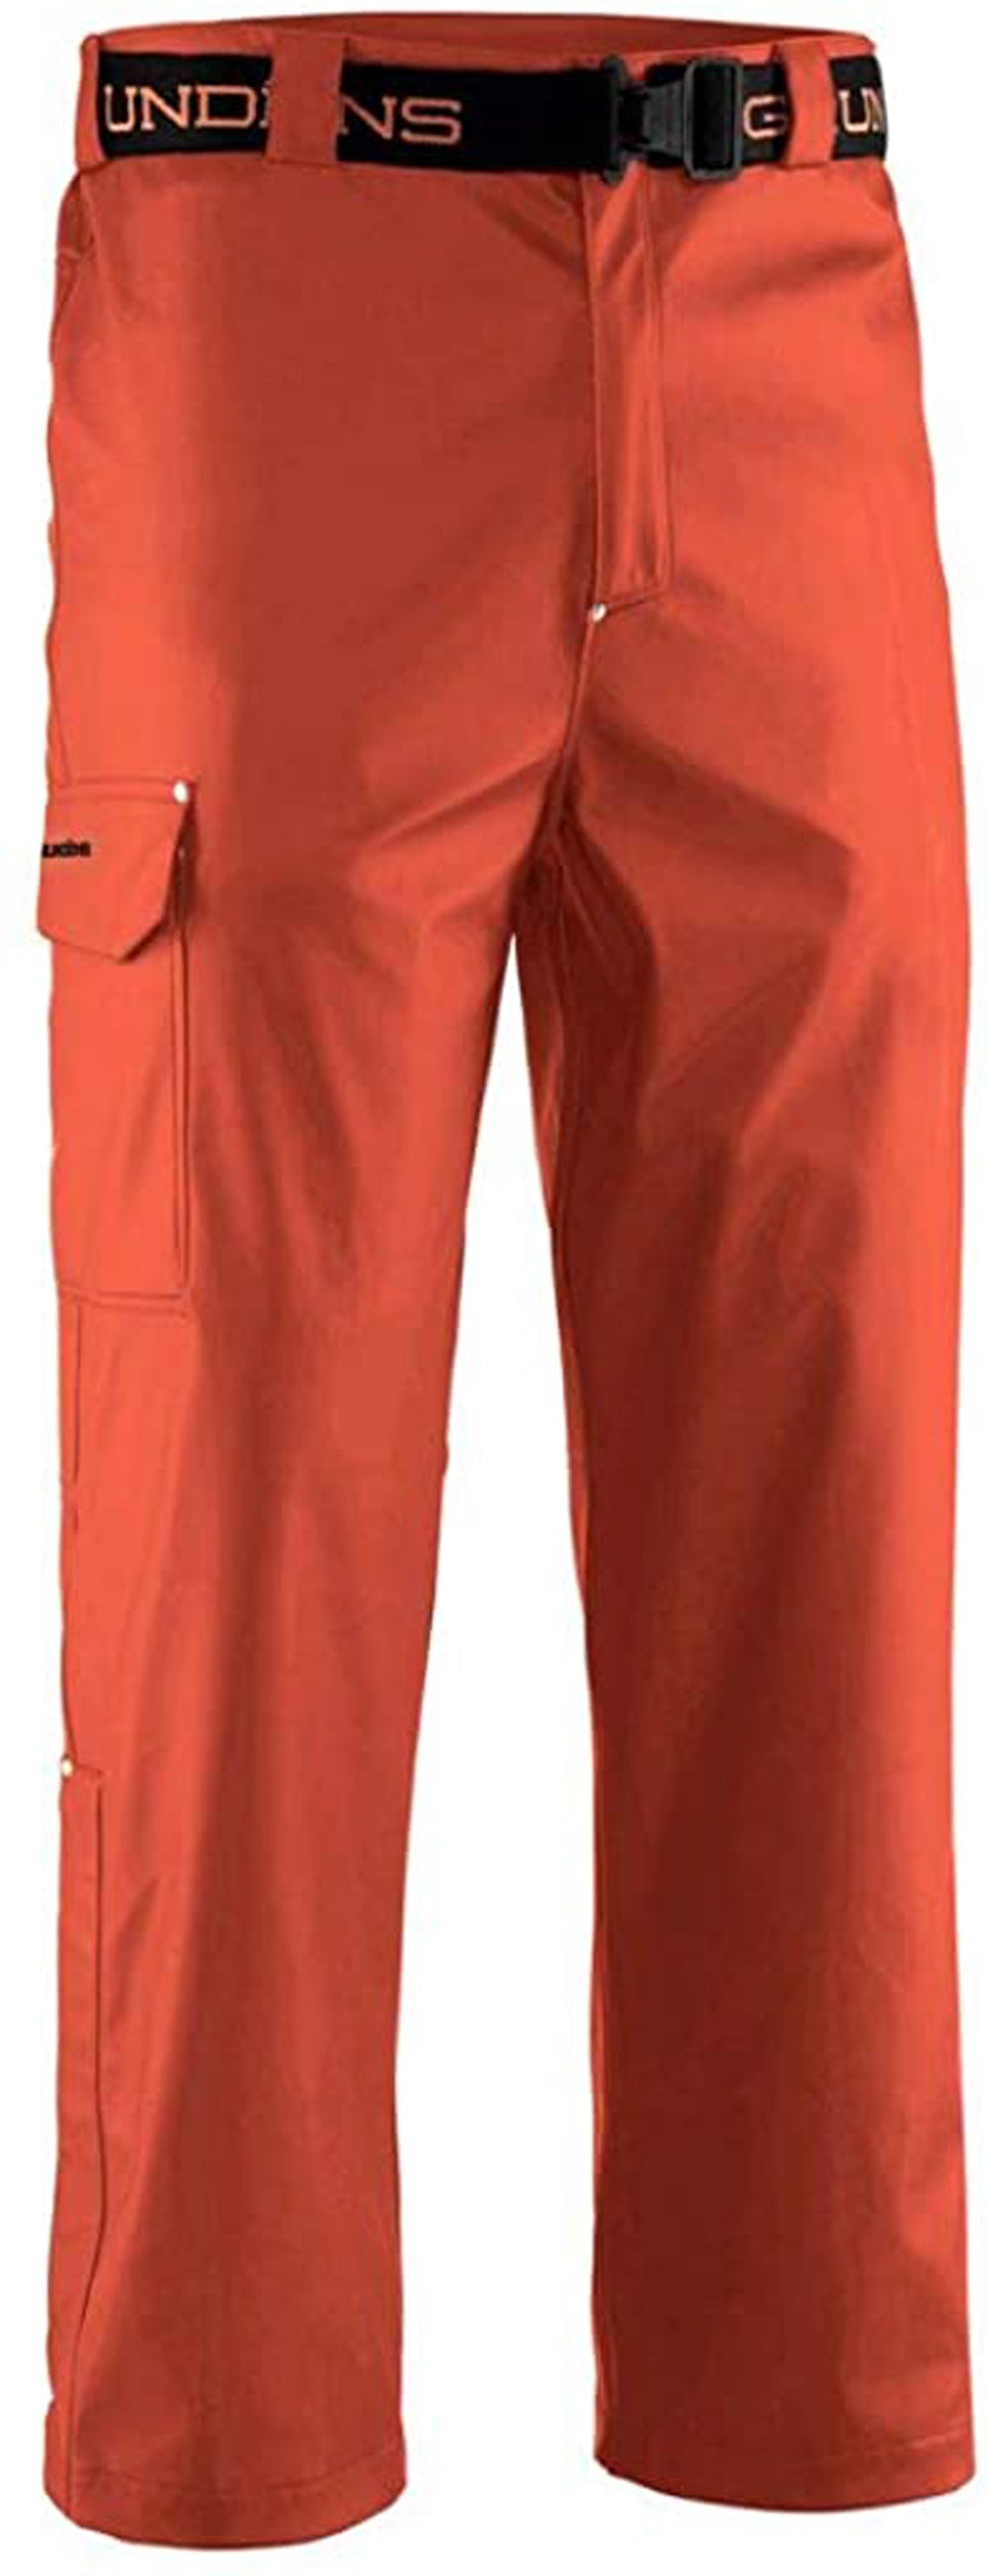 Neptune Pant in Orange color from the front view